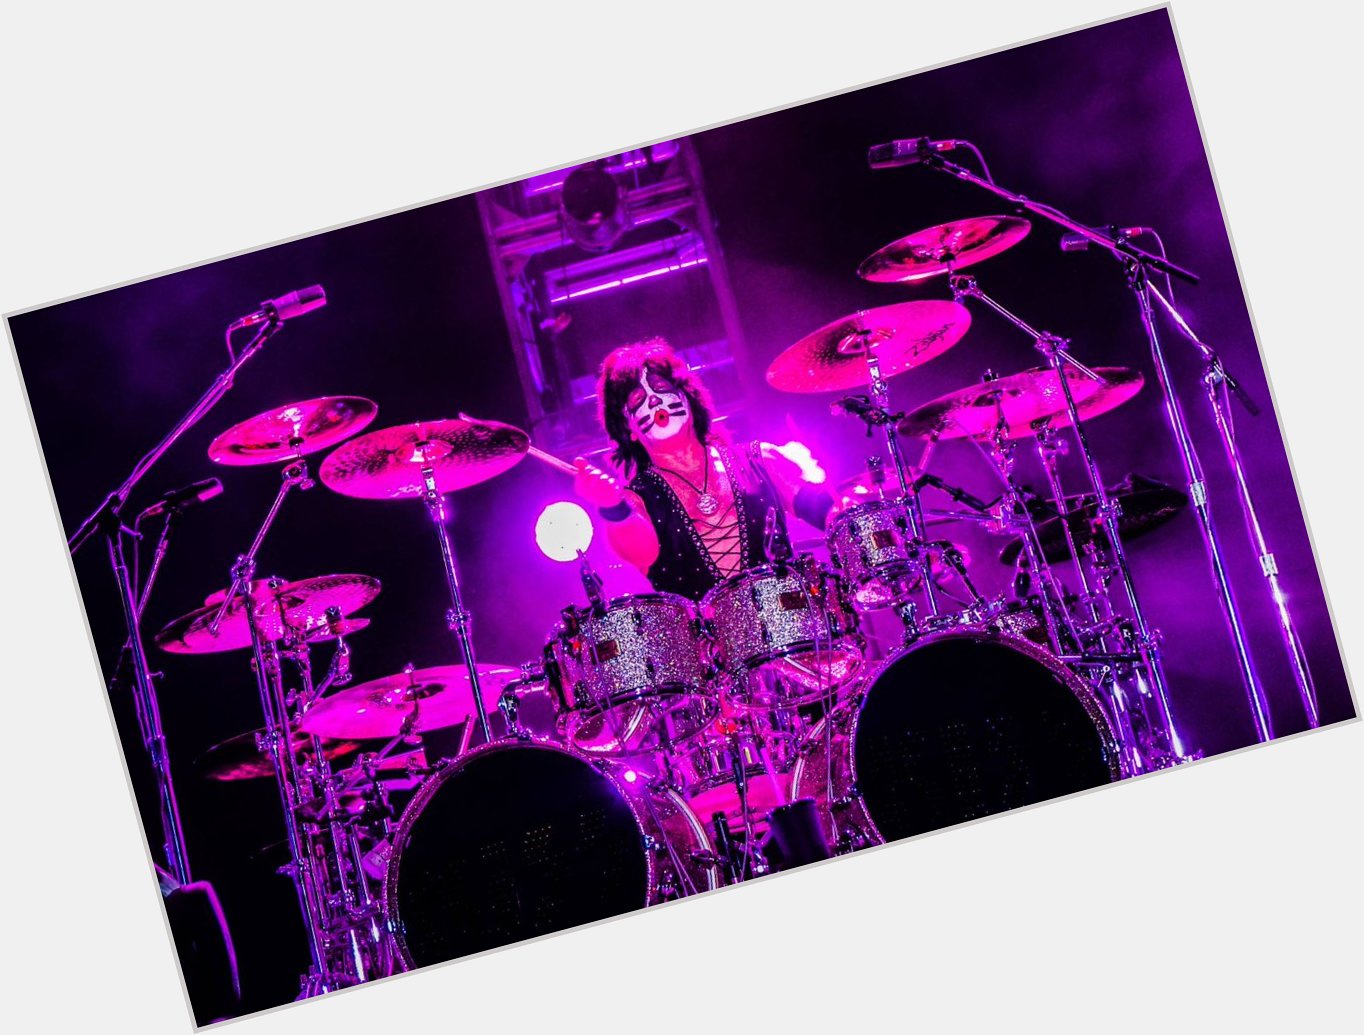 Happy 60th Birthday to our favorite drummer, Eric Singer! We hope you have an amazing day!! 